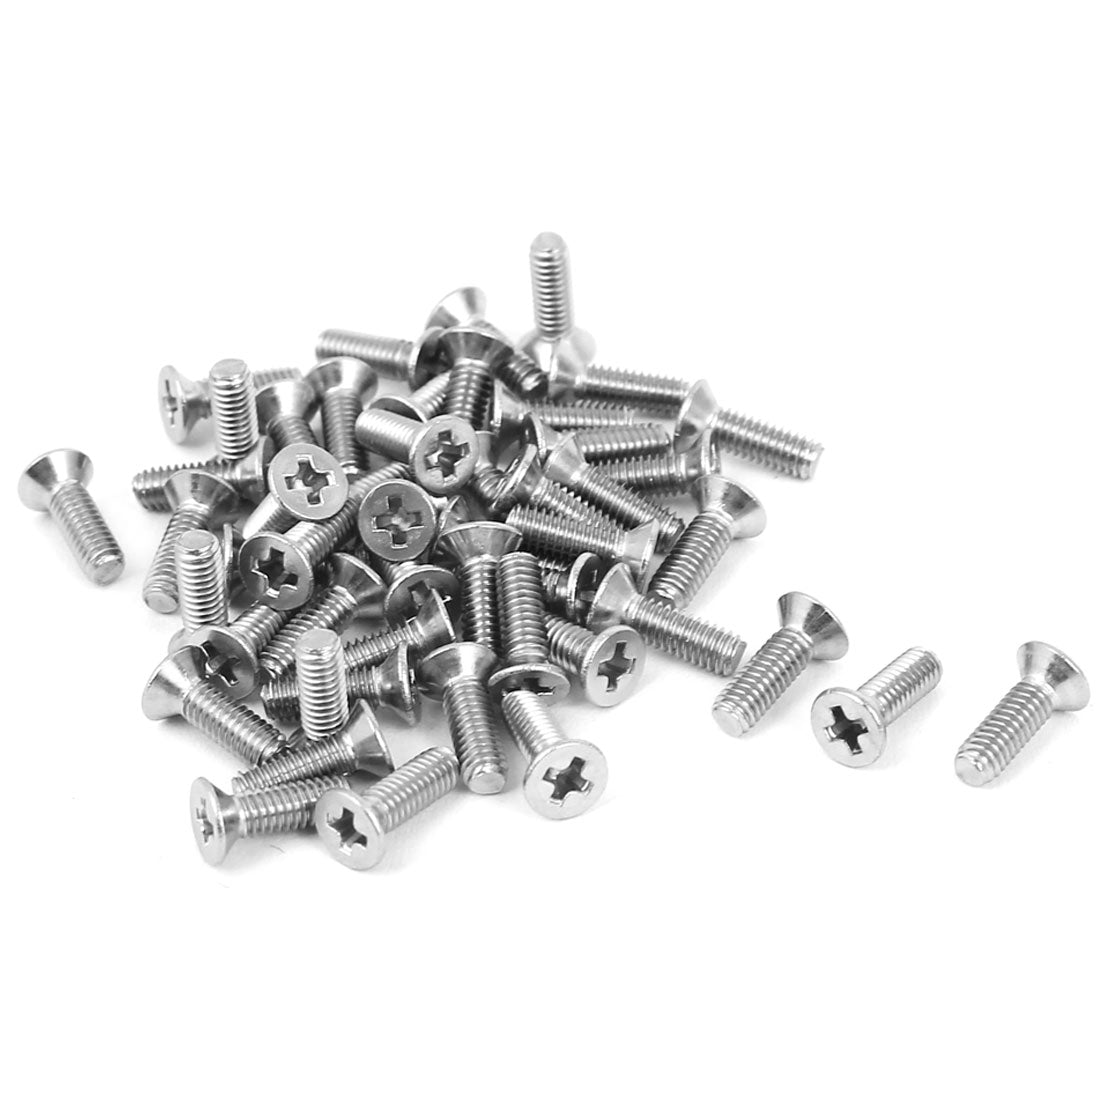 uxcell Uxcell M2.5x8mm 304 Stainless Steel Phillips Flat Countersunk Head Machine Screws 50pcs